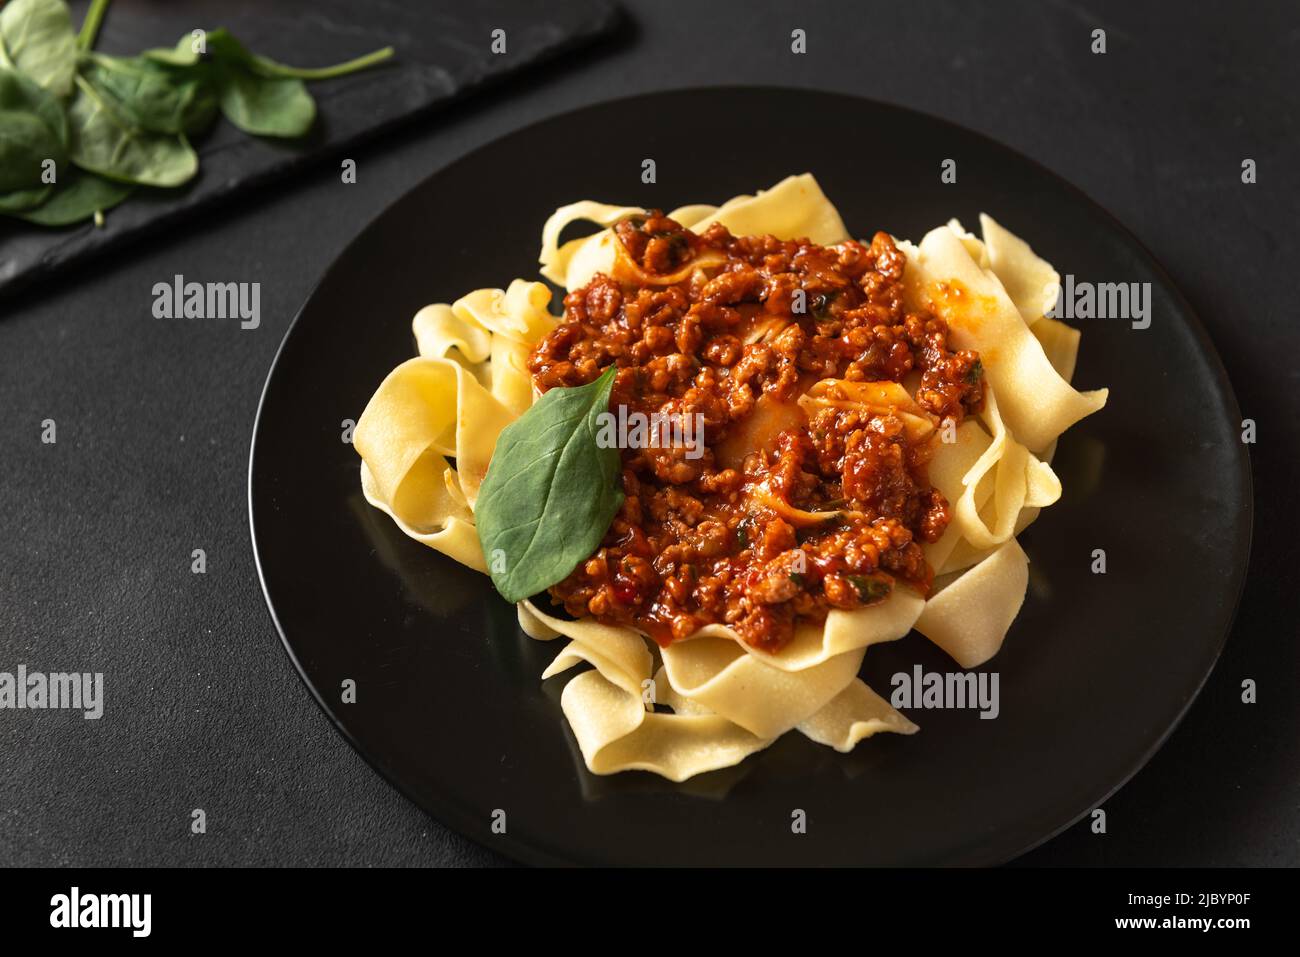 Pappardelle pasta with prosciutto and cheese sauce on a plate. Food and drink Stock Photo